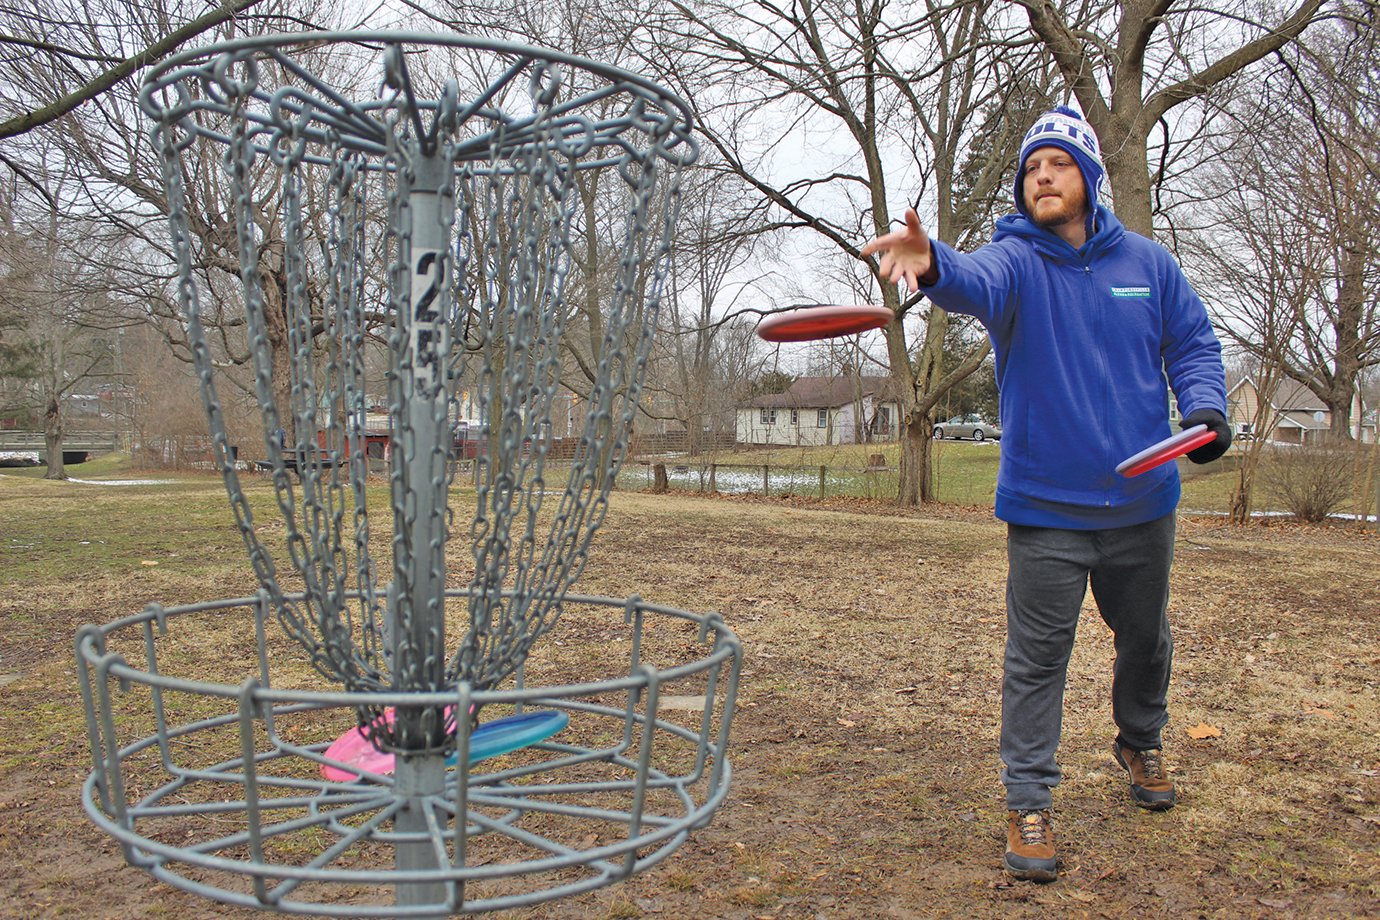 Parks and Recreation personal trainer Jerimiah Adams, 34, takes advantage of a near-empty Milligan Park on Monday to hone up on his disc golf skills. Adams regularly participates in year-round disc golf tournaments, including the ongoing Wintry Indiana Frozen Fundraiser series and the Professional Disc Golf Association.